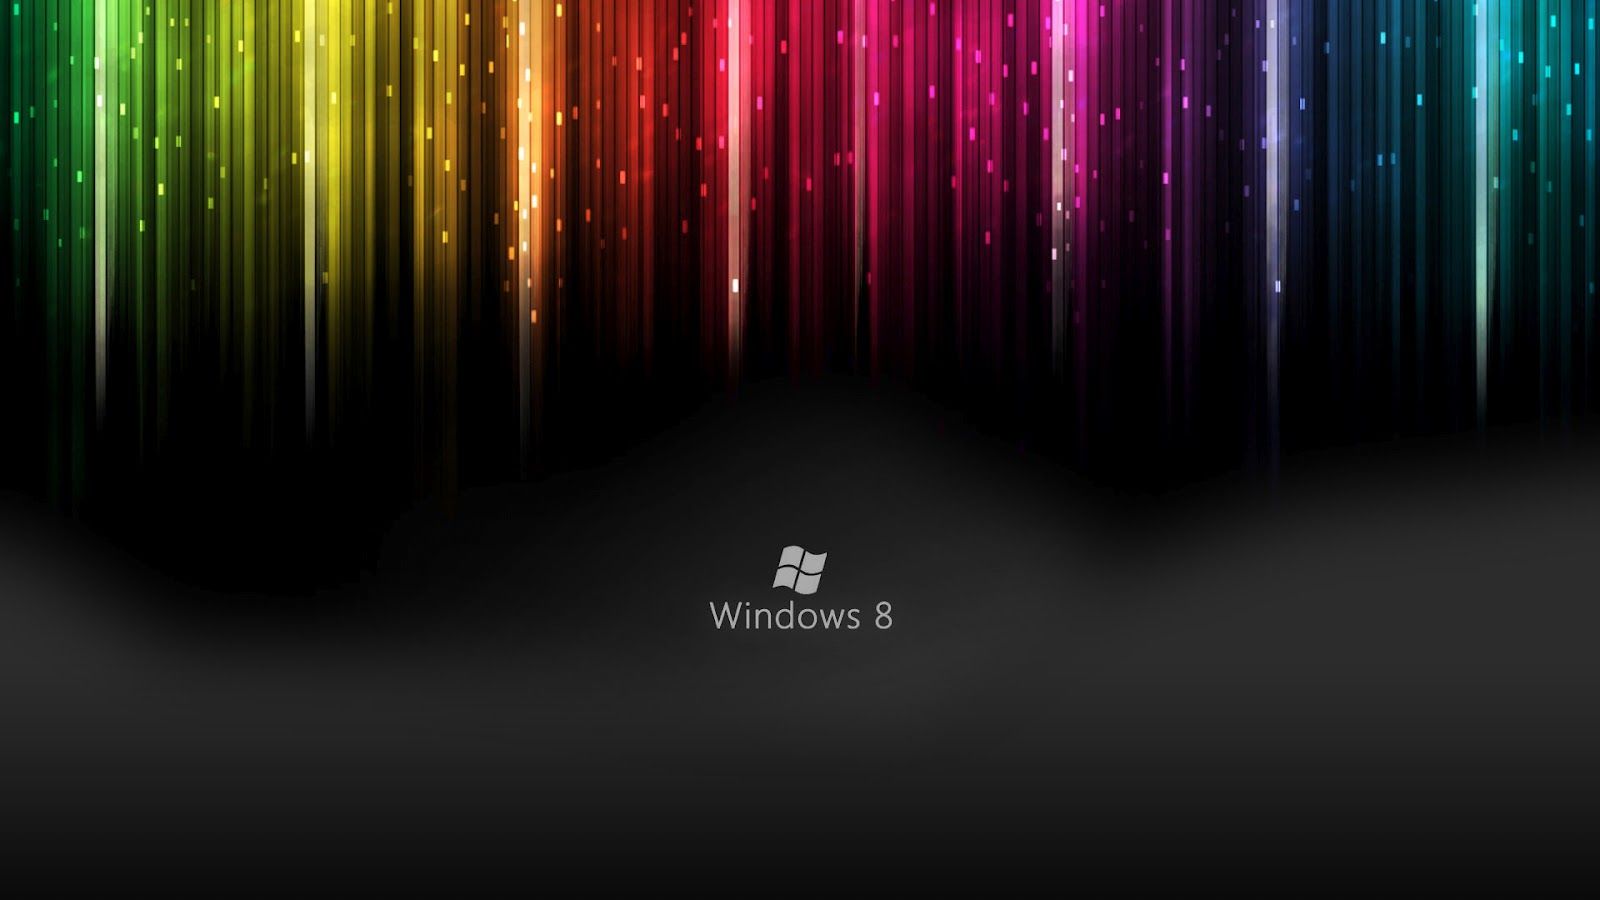 HD Wallpapers for Windows 8